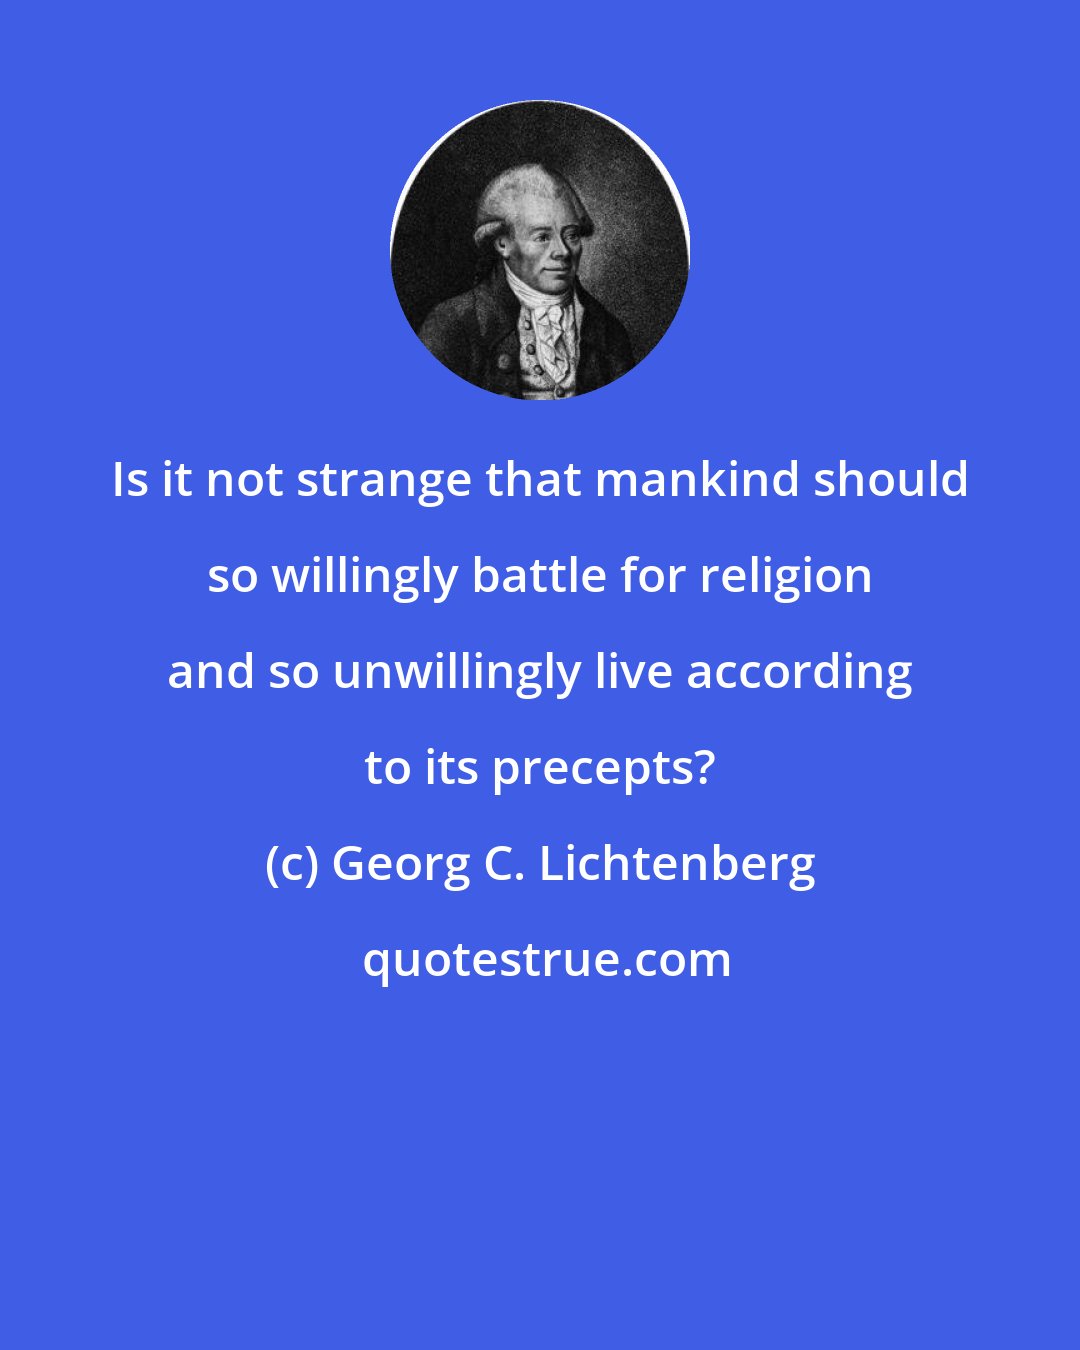 Georg C. Lichtenberg: Is it not strange that mankind should so willingly battle for religion and so unwillingly live according to its precepts?